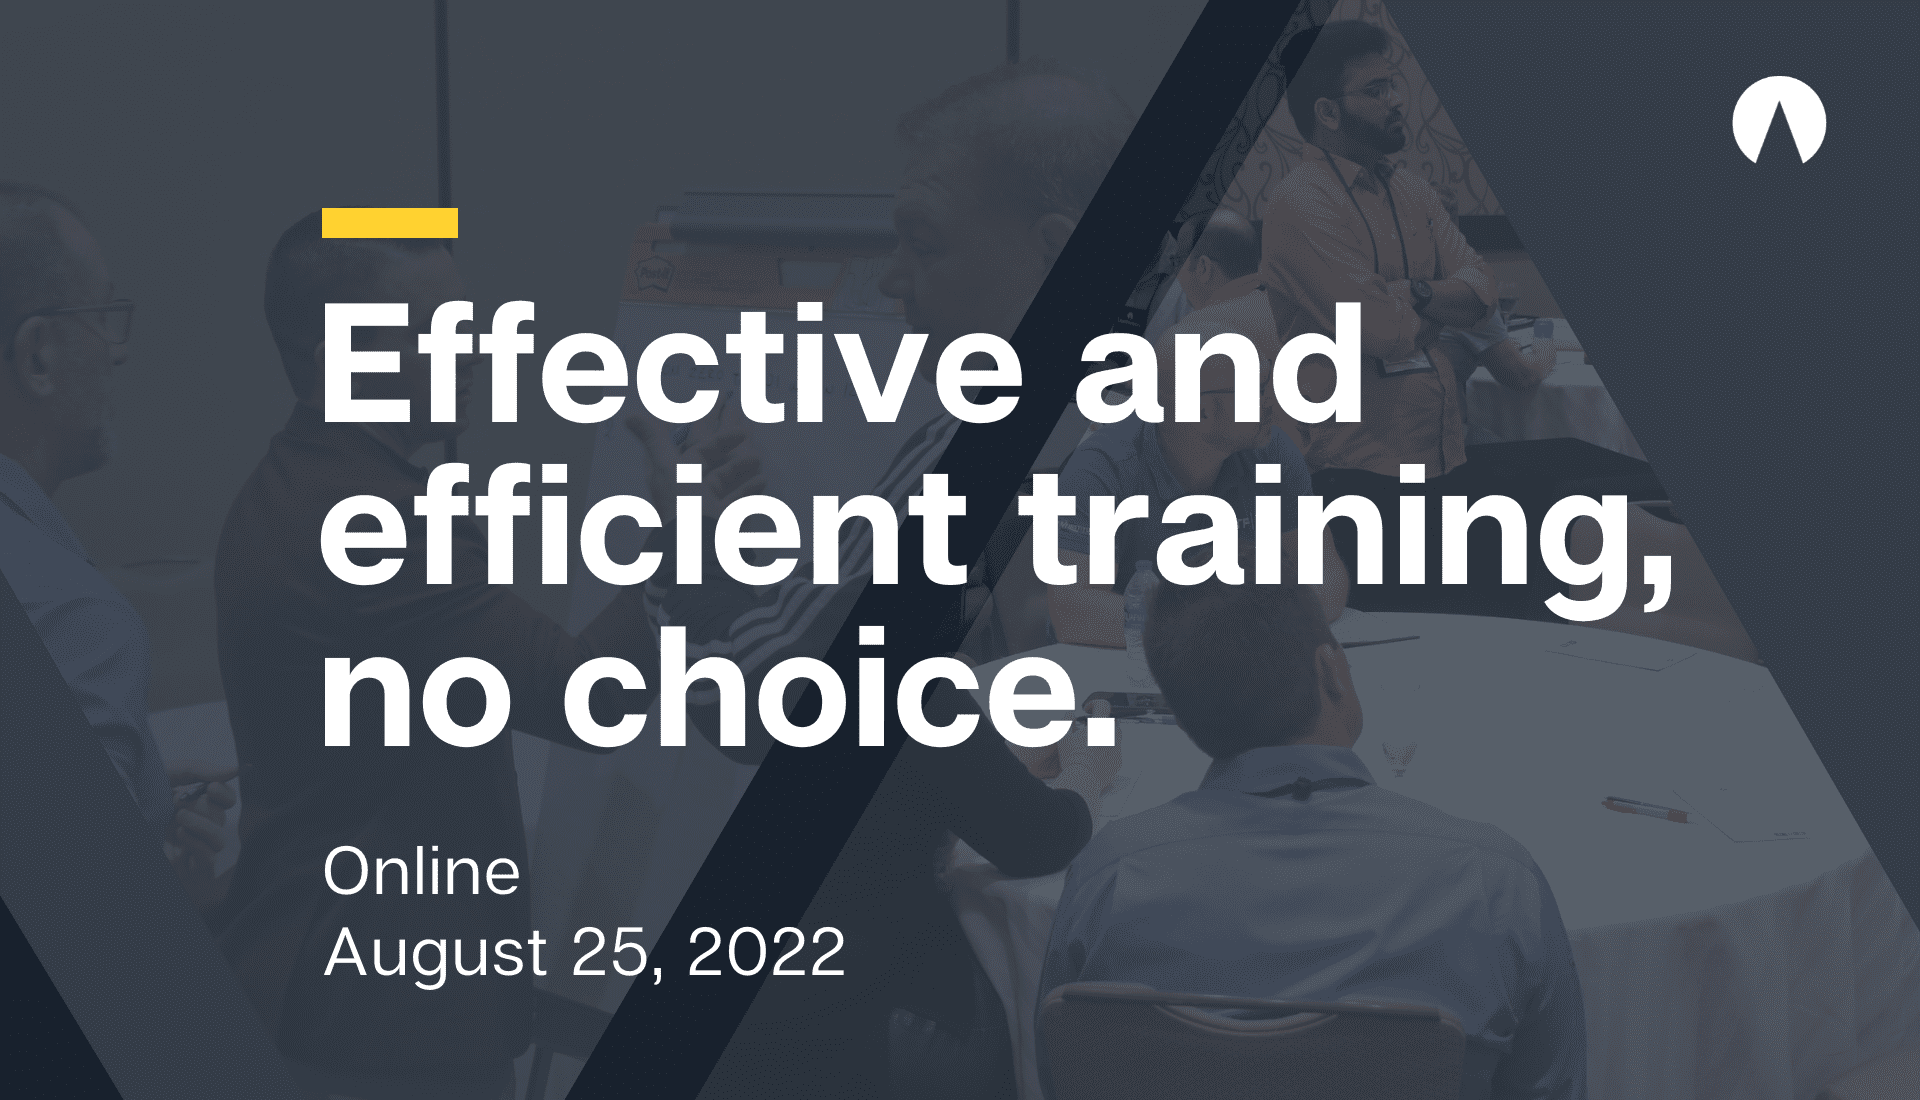 Effective and efficient training, no choice.